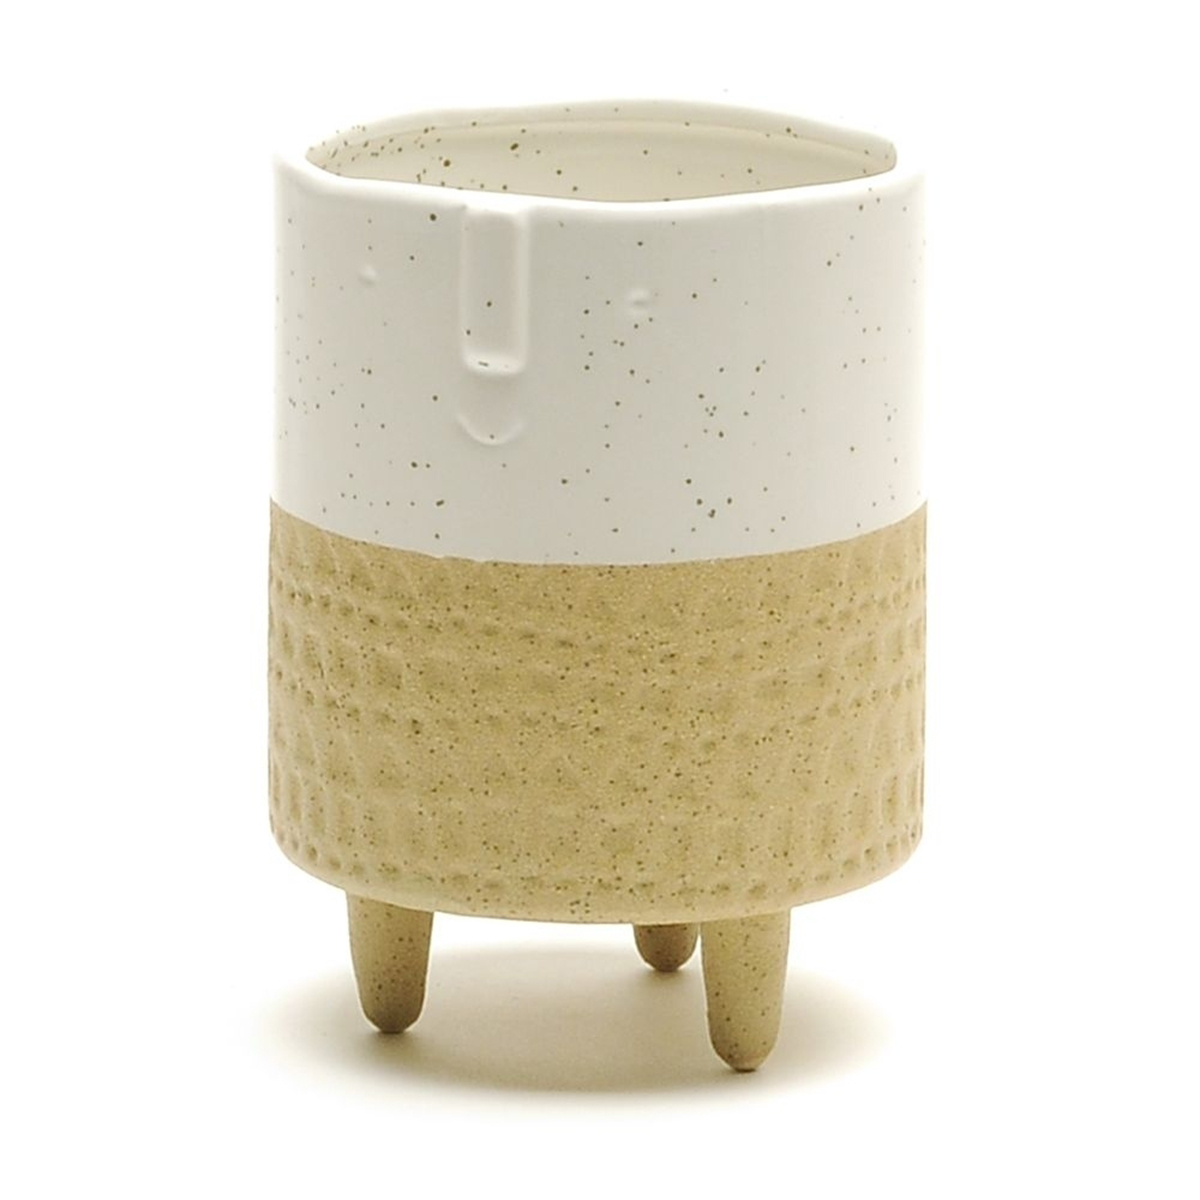 Picture of Two Tone Ceramic Pot On Feet 4.75D 6.5"